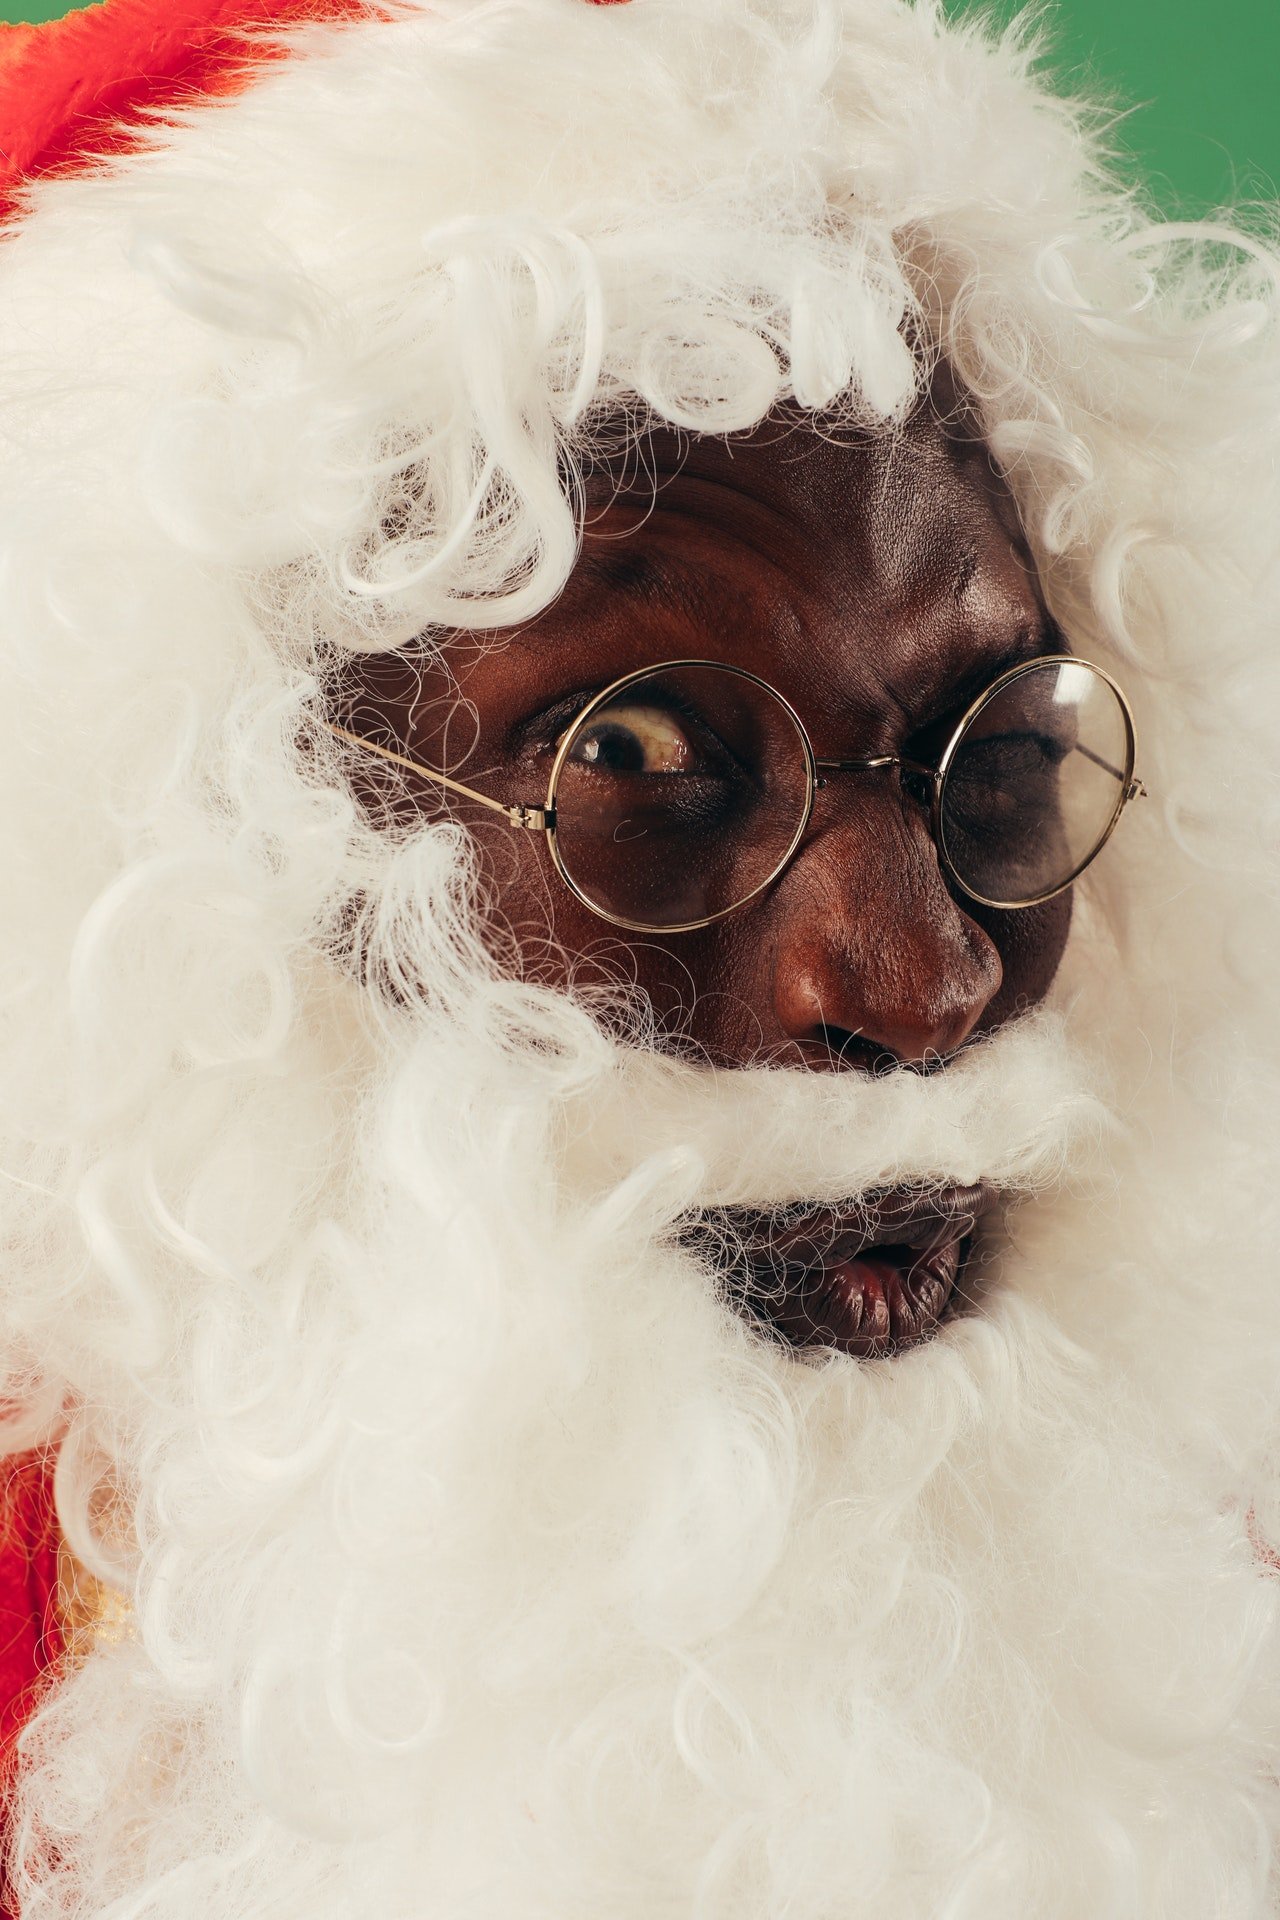 Officer Henning dressed as Santa to surprise Chris's family. | Source: Pexels